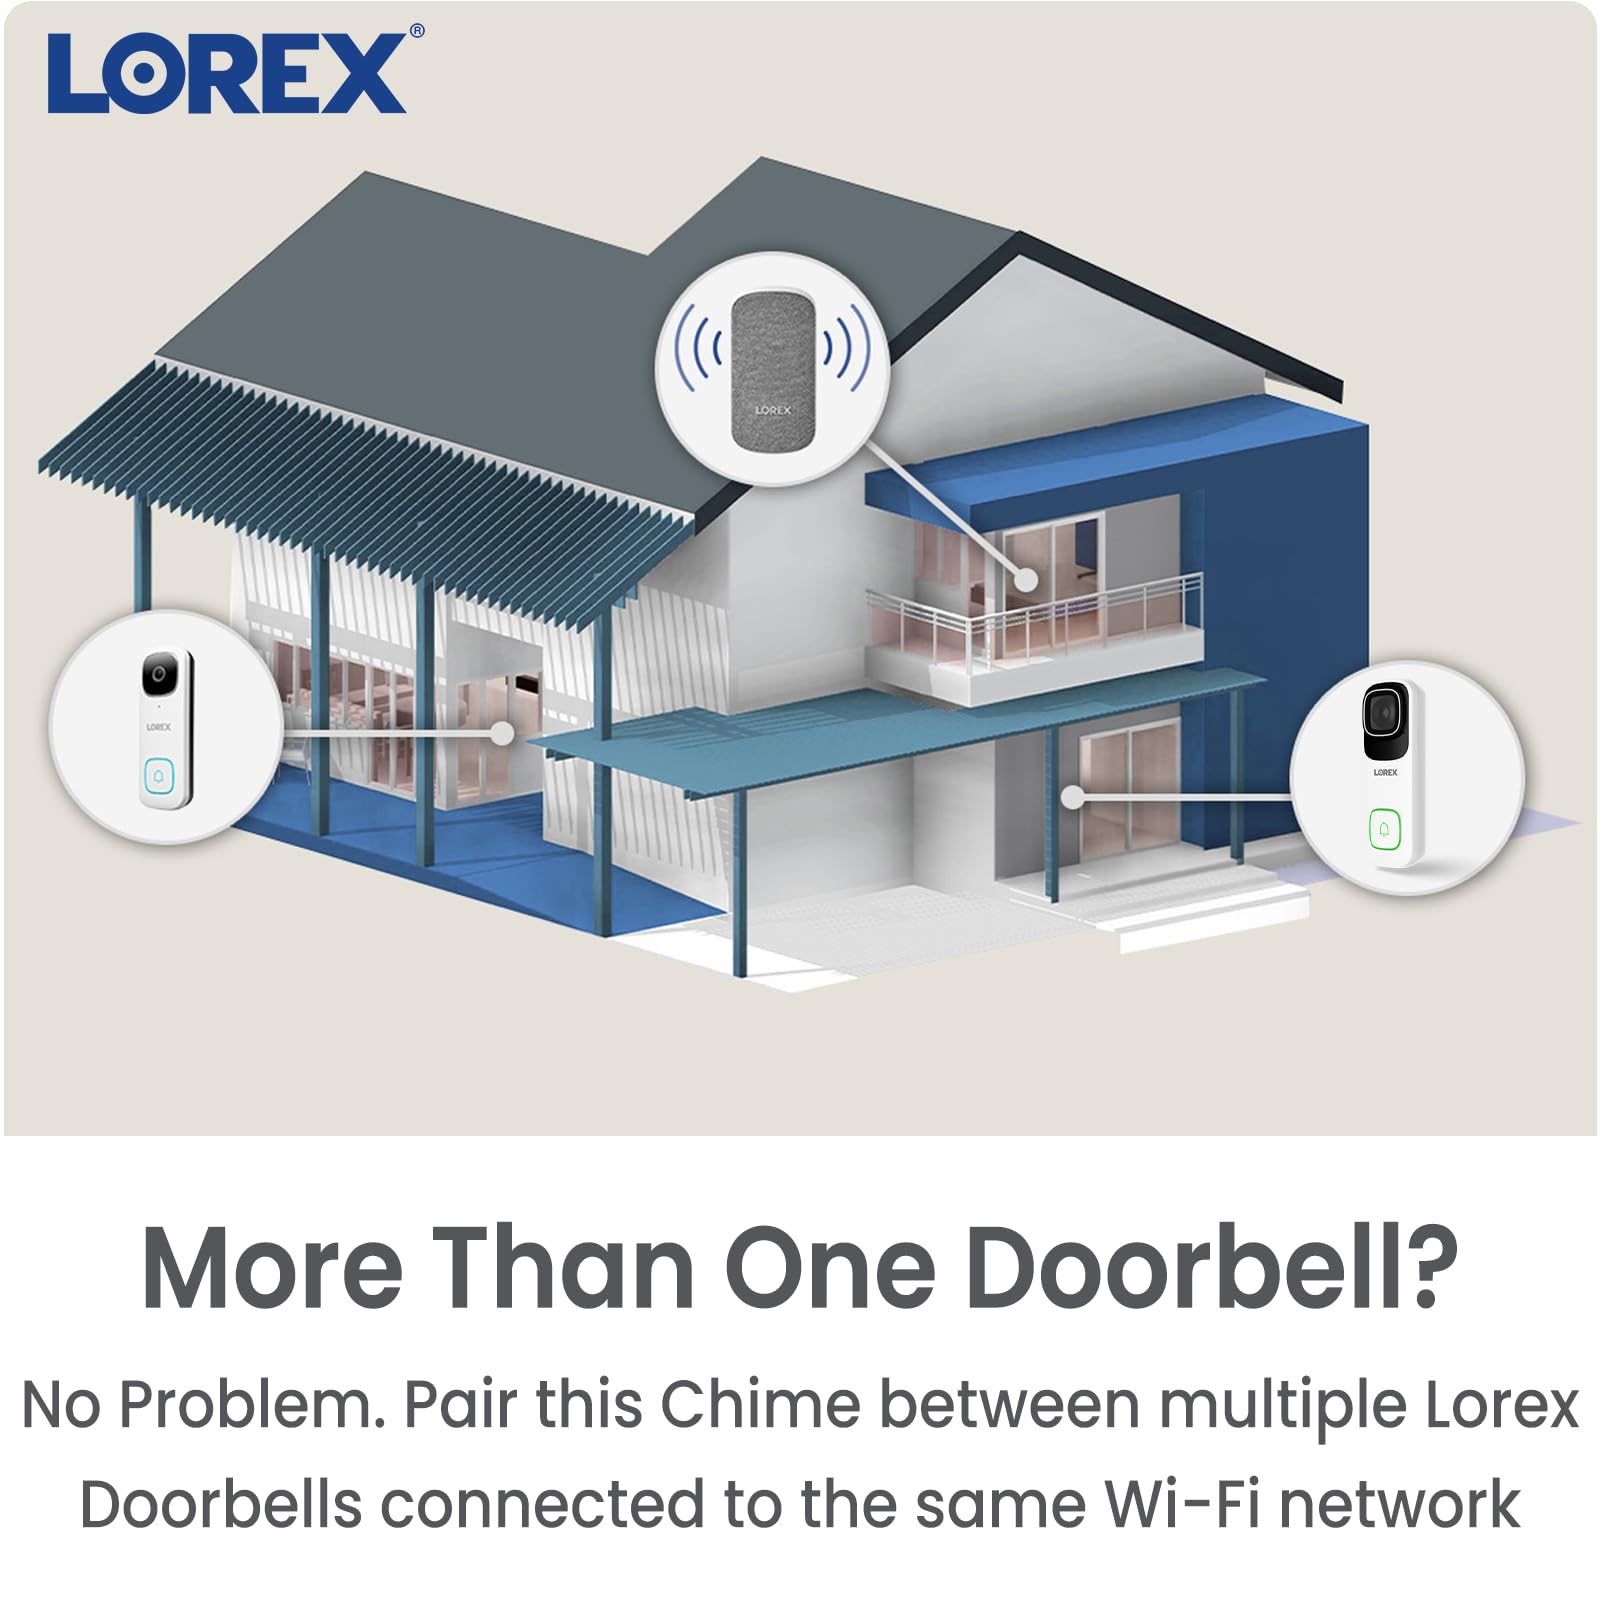 Lorex Video Doorbell and Home Security System Chime Add-On – Easy Plug-and-Play Installation, Customizable Digital Door Bell Chime, Seamless Integration with Lorex Security Video Doorbells